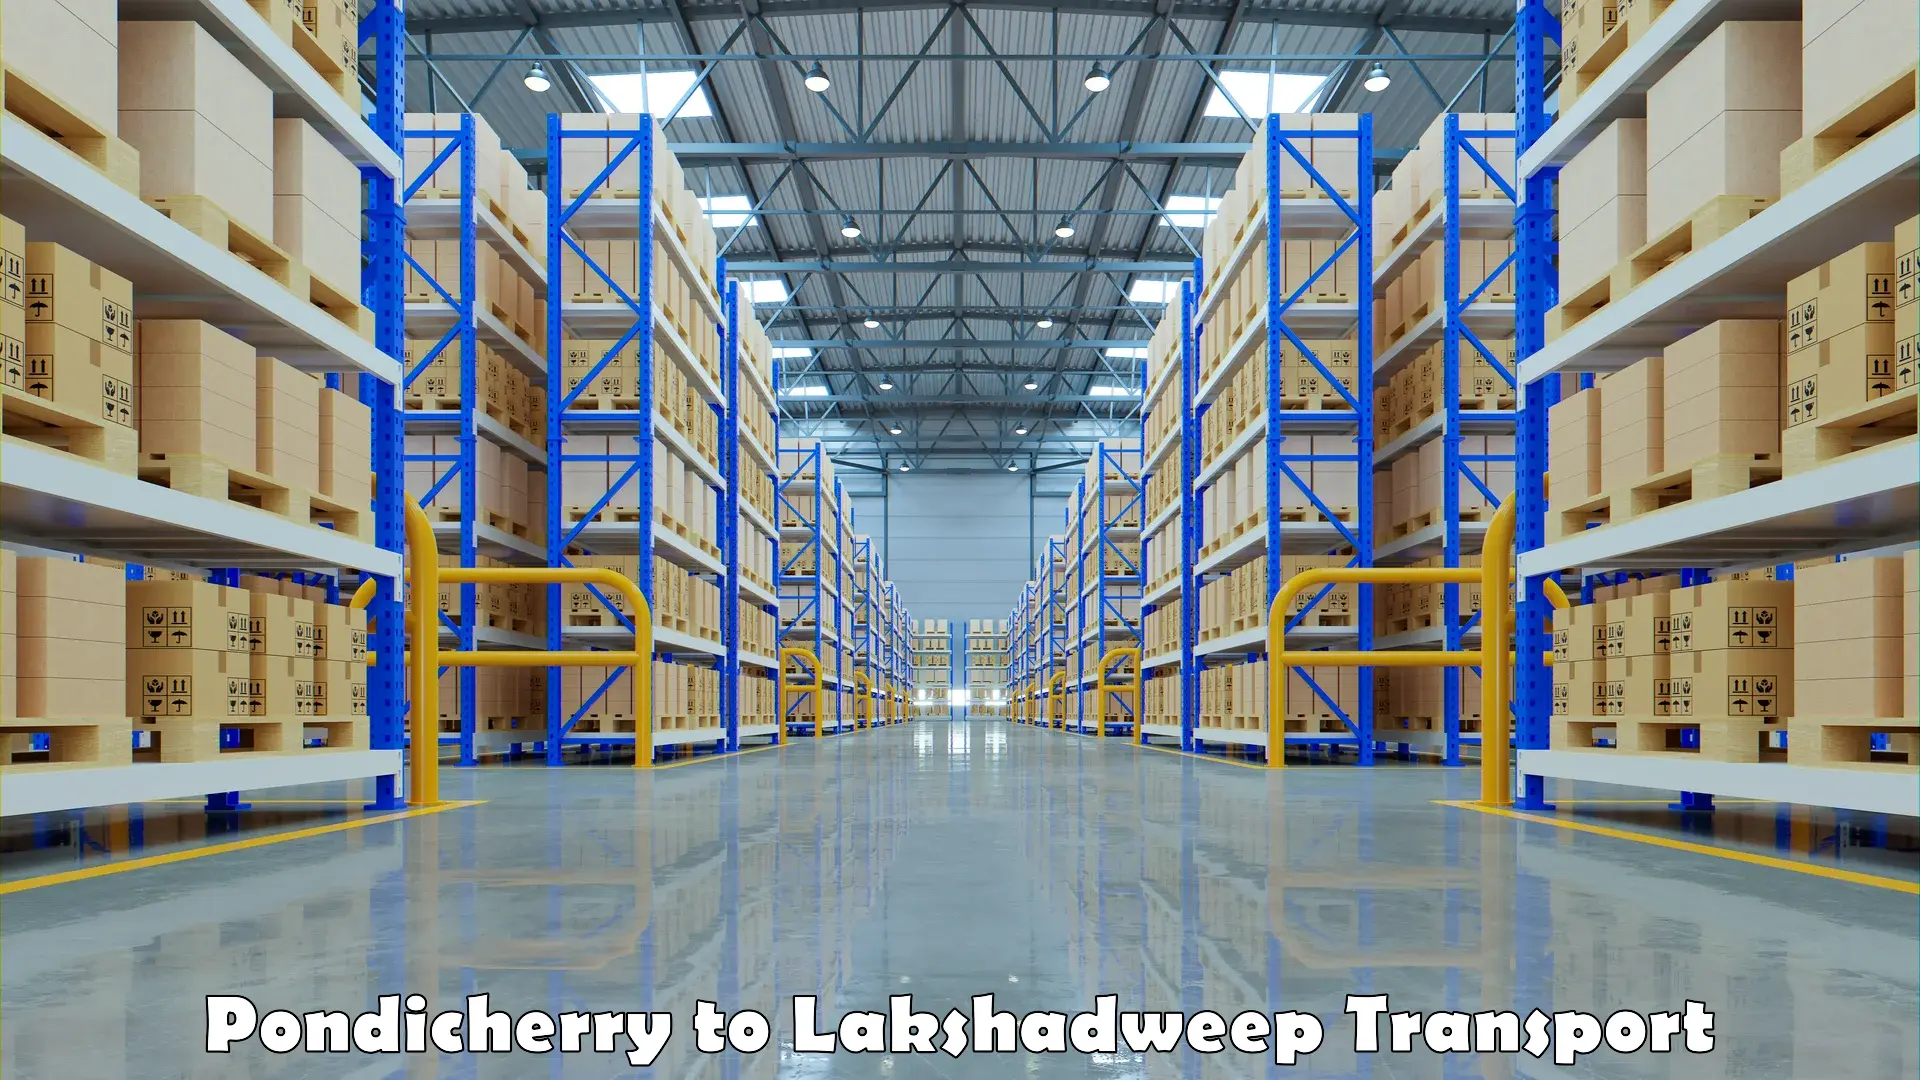 Daily parcel service transport Pondicherry to Lakshadweep